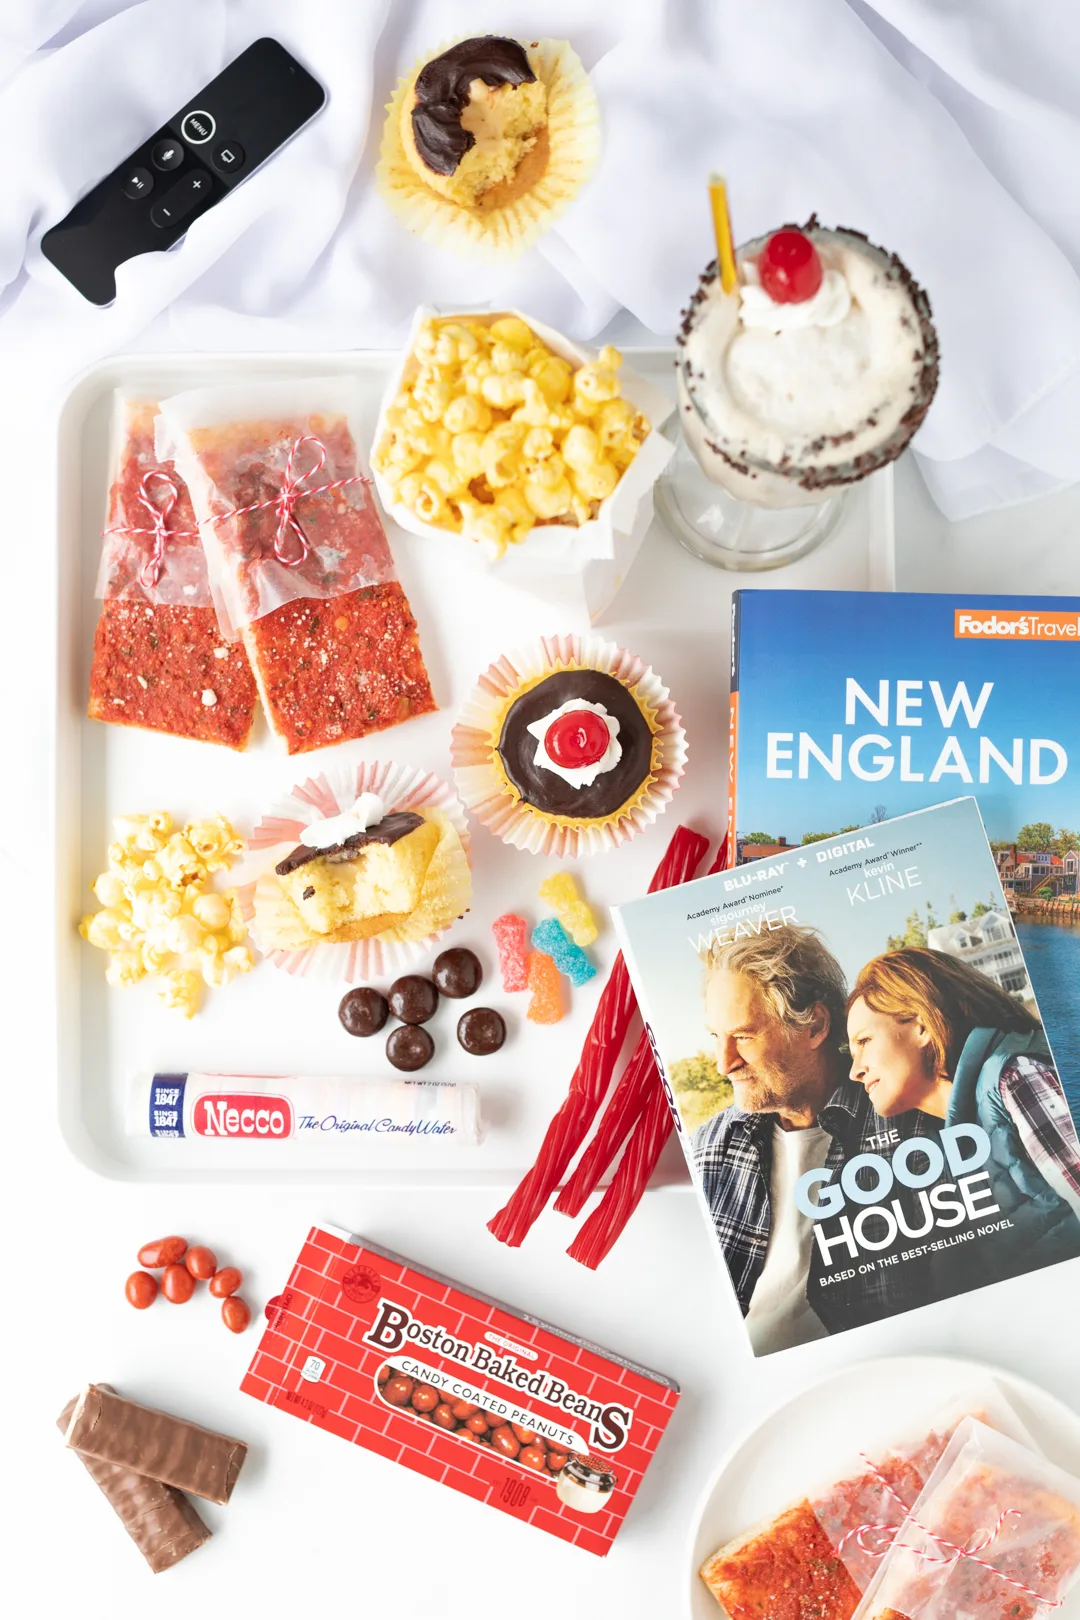 the good house movie snack tray with popcorn and candies that are new england theme